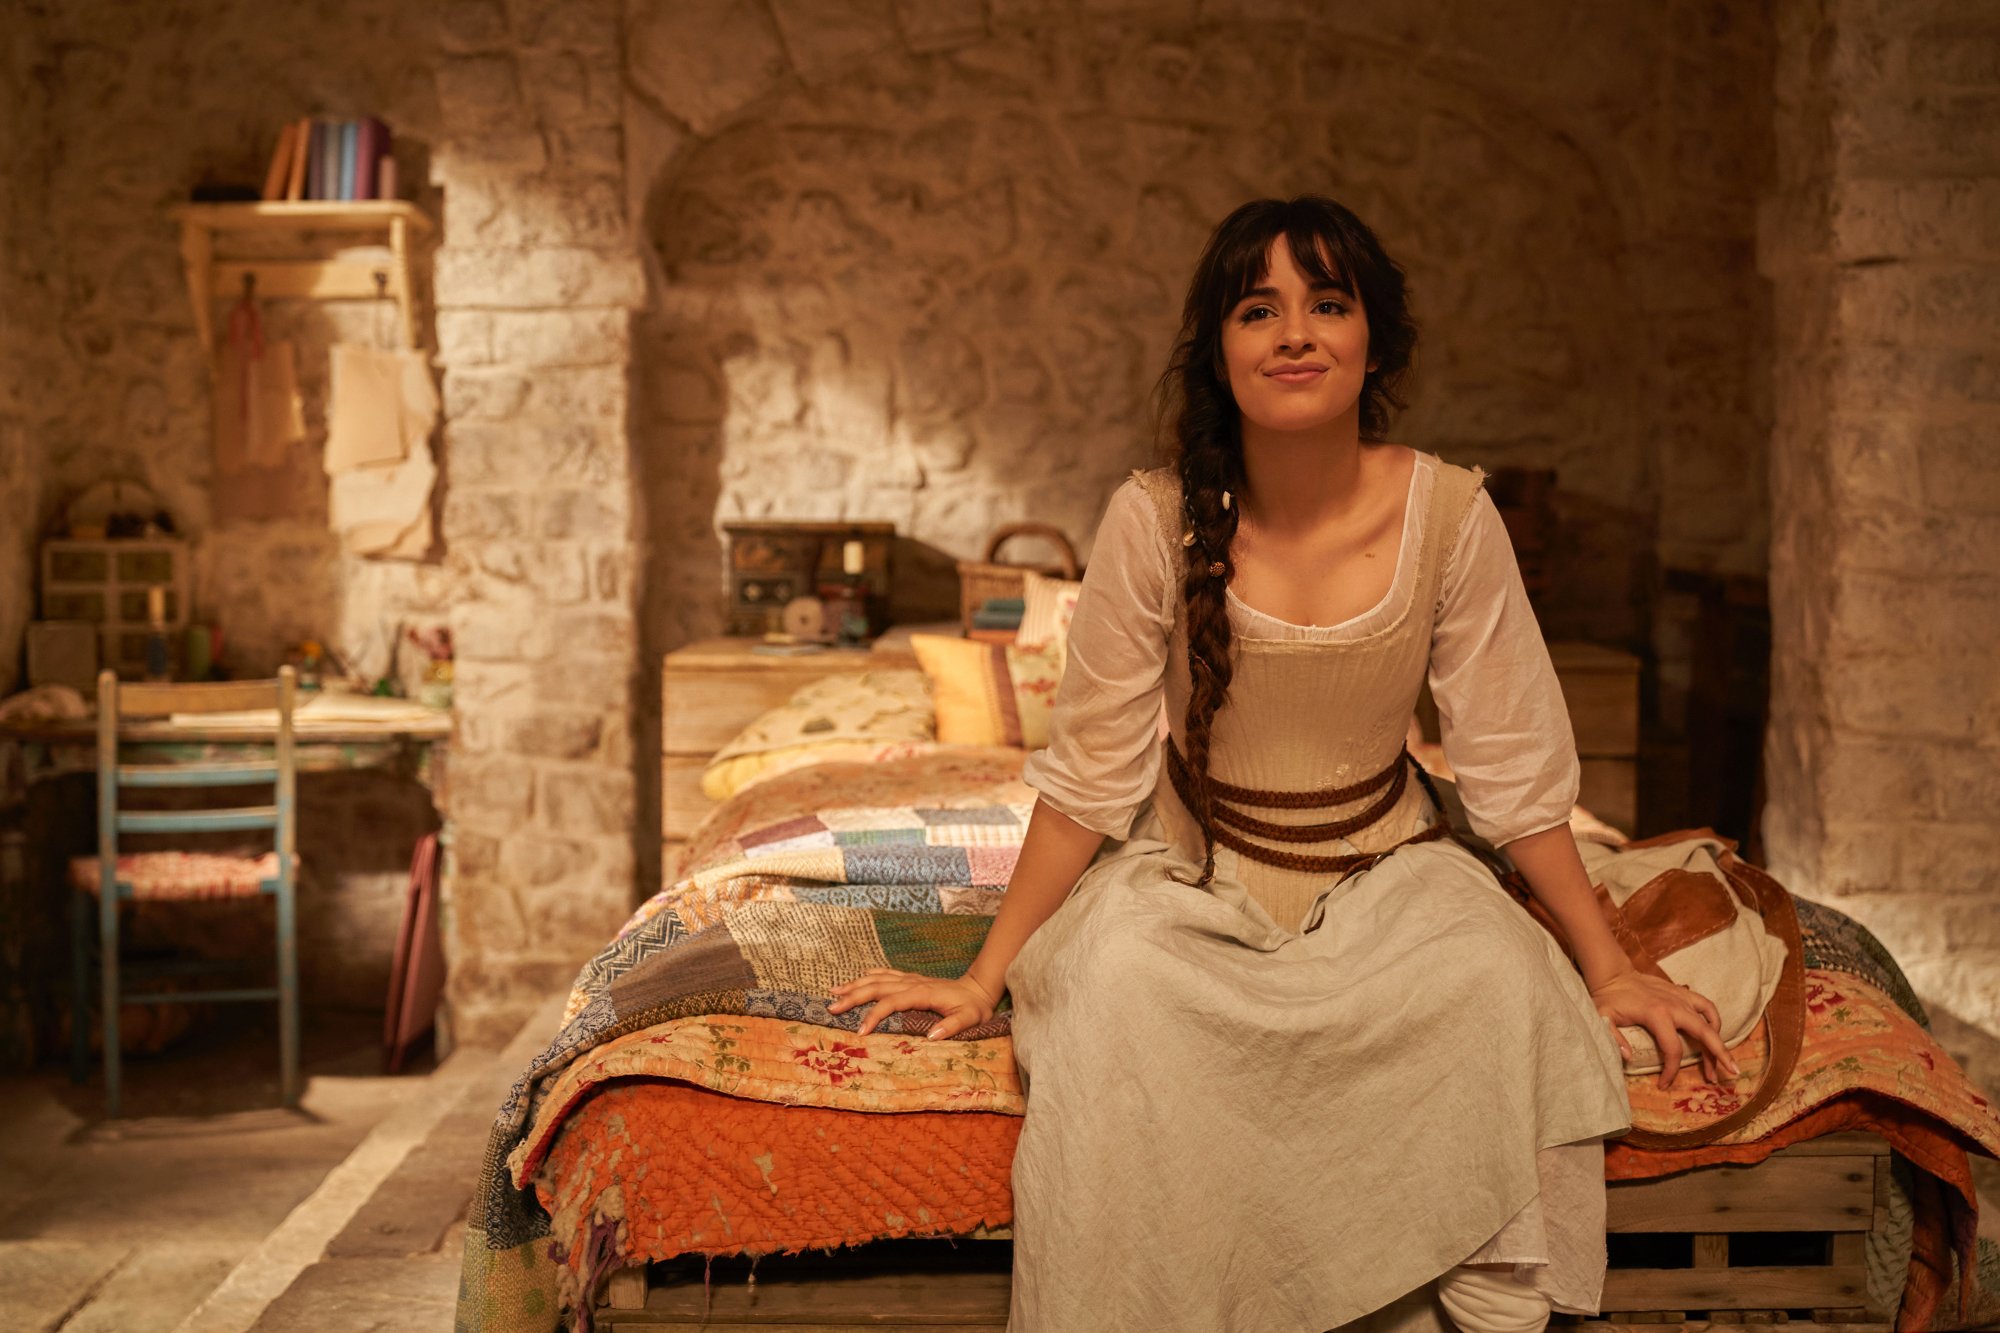 Camila Cabello smiling and sitting on a bed in a scene from 'Cinderella,' which leads the Oscars 2022 Fan Favorite vote